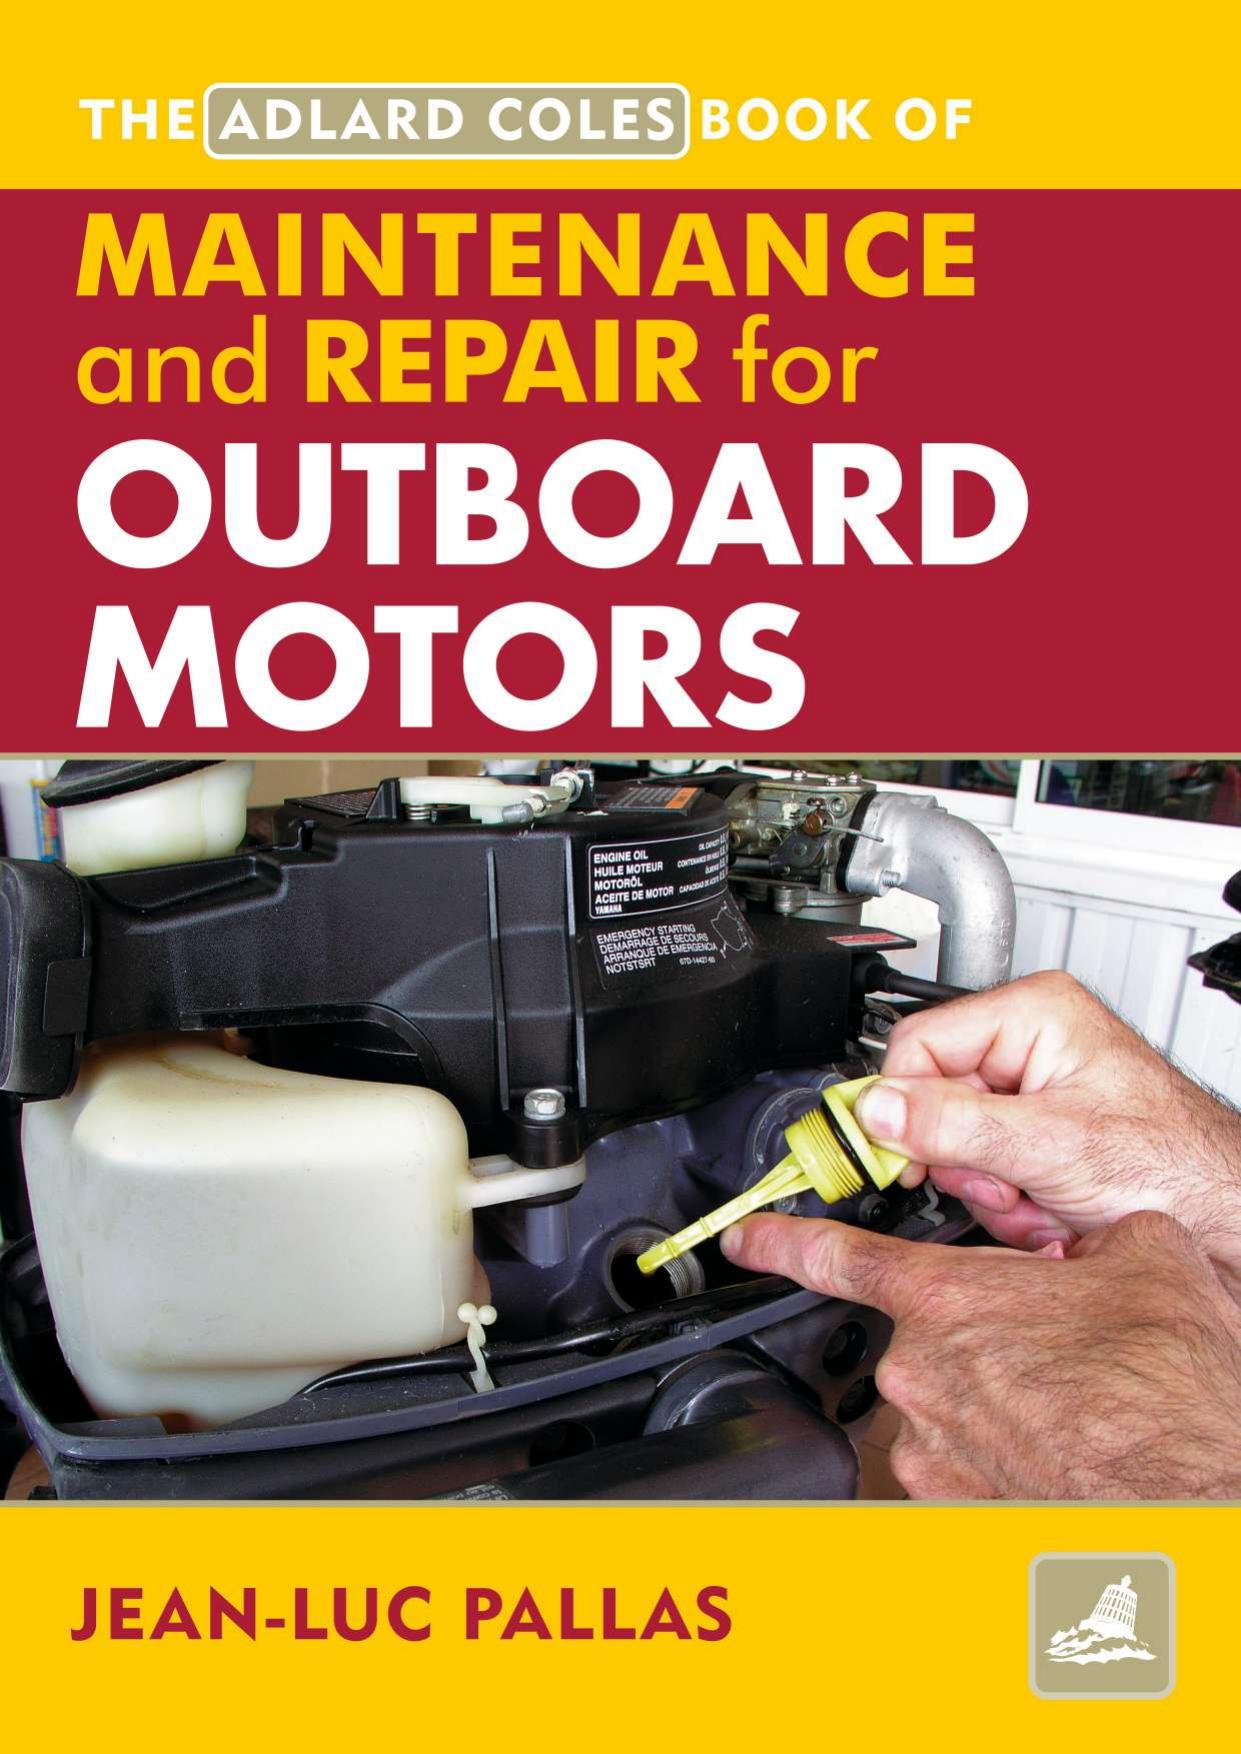 The Adlard Coles Book Of Maintenance & Repair For Outboard Motors by Jean-Luc Pallas